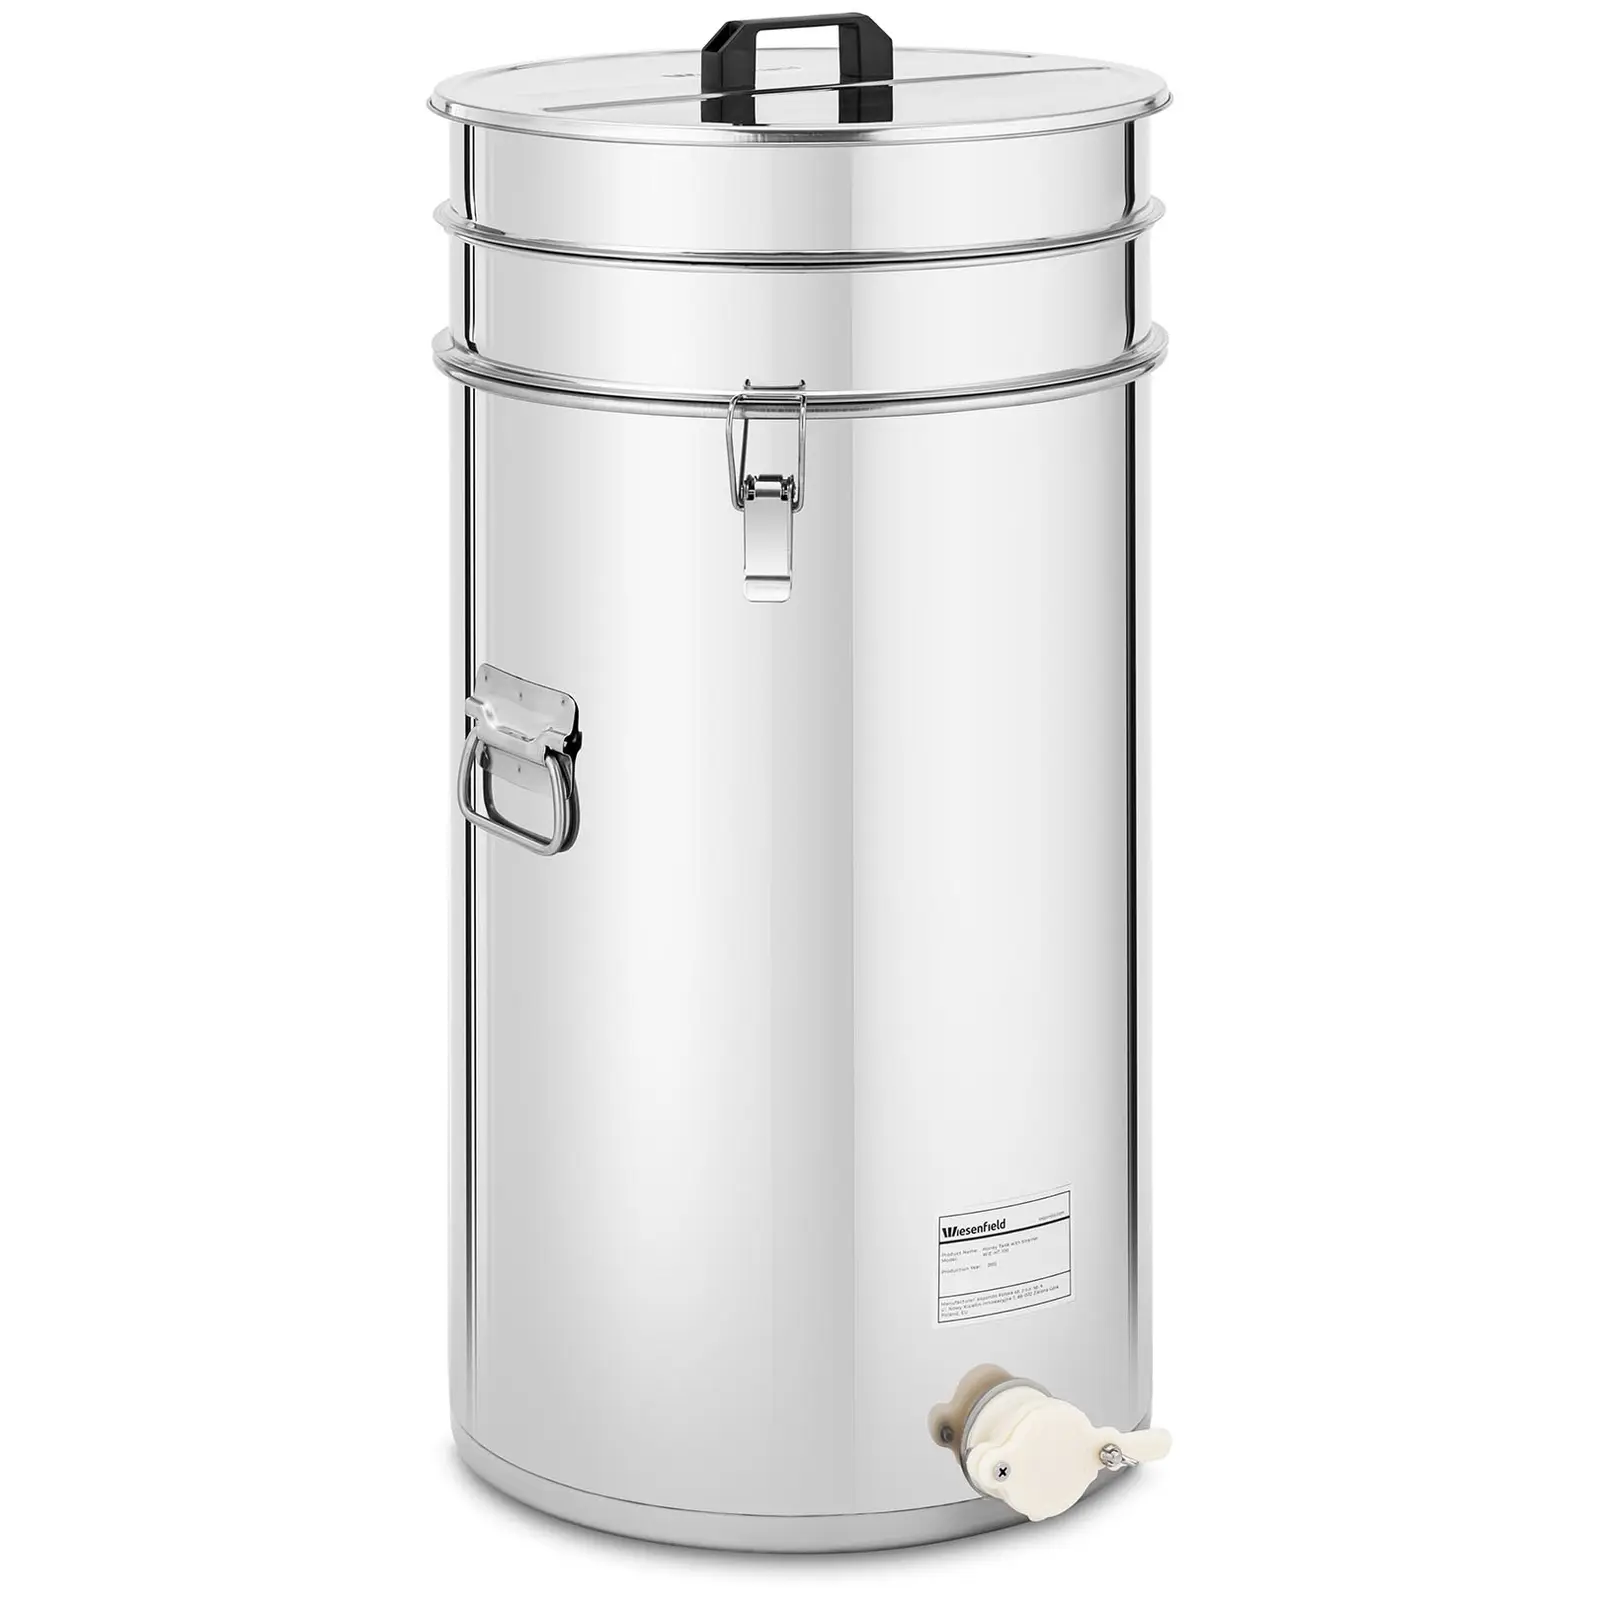 Honey Tank - 70 L - with sieve, lid and squeeze tap - stainless steel